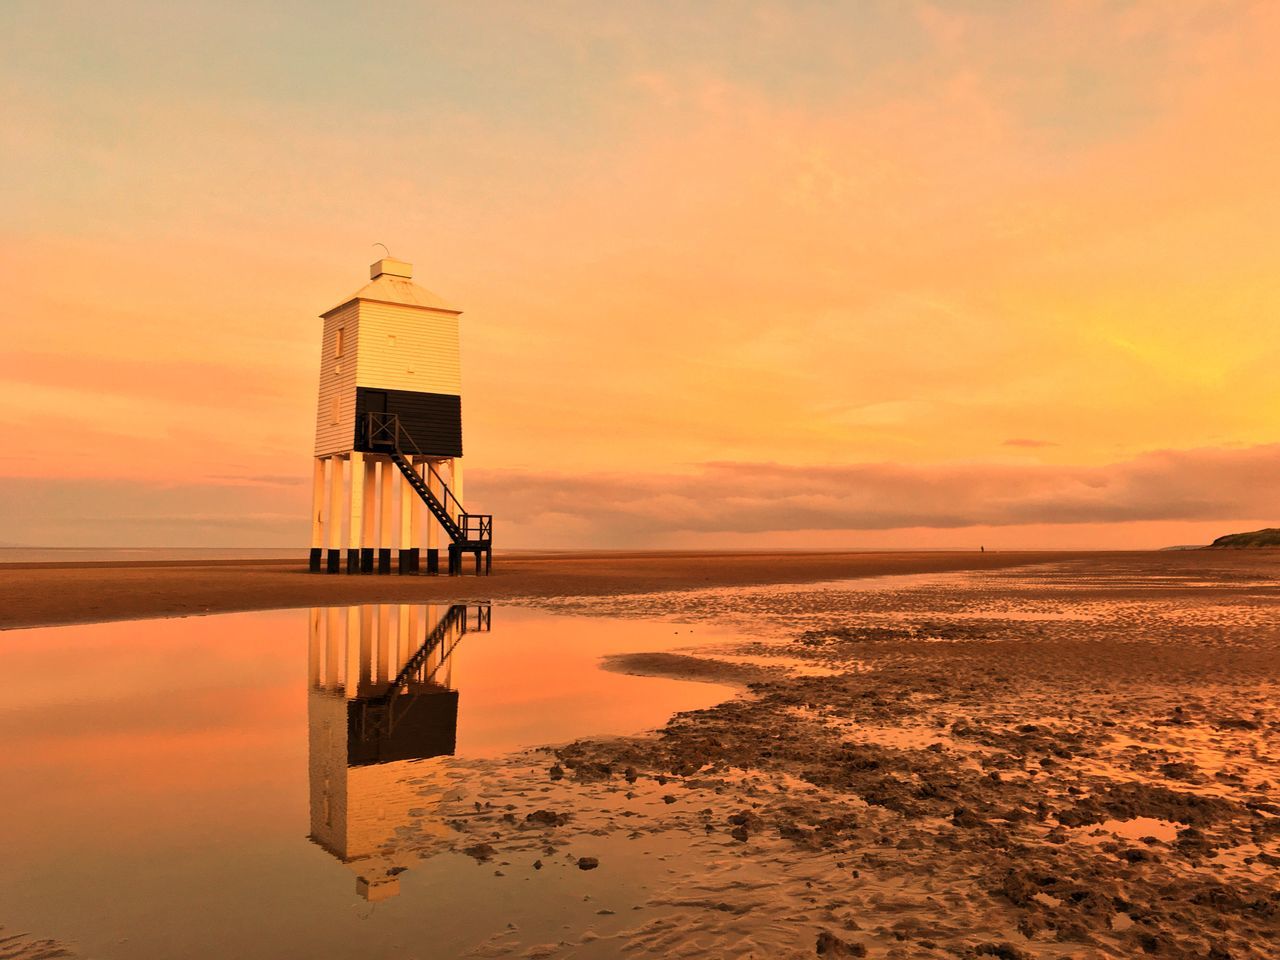 sunset, water, tranquility, sea, tranquil scene, beauty in nature, reflection, scenics, sky, nature, beach, orange color, horizon over water, outdoors, built structure, no people, lifeguard hut, architecture, day